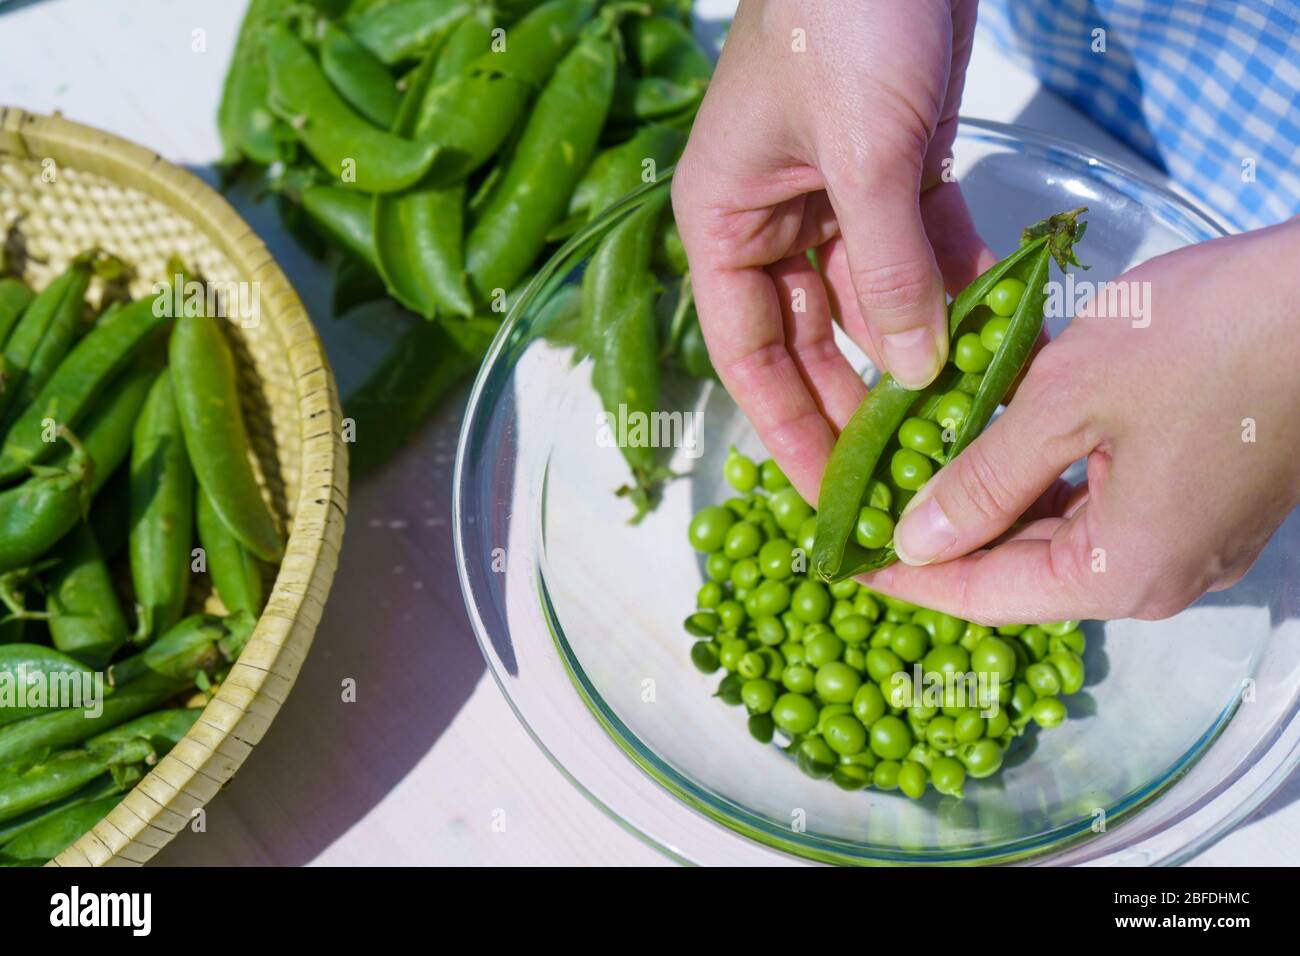 Woman with apron shells peas inside a glass bowl outdoors with strong sunlight in the greenery Stock Photo